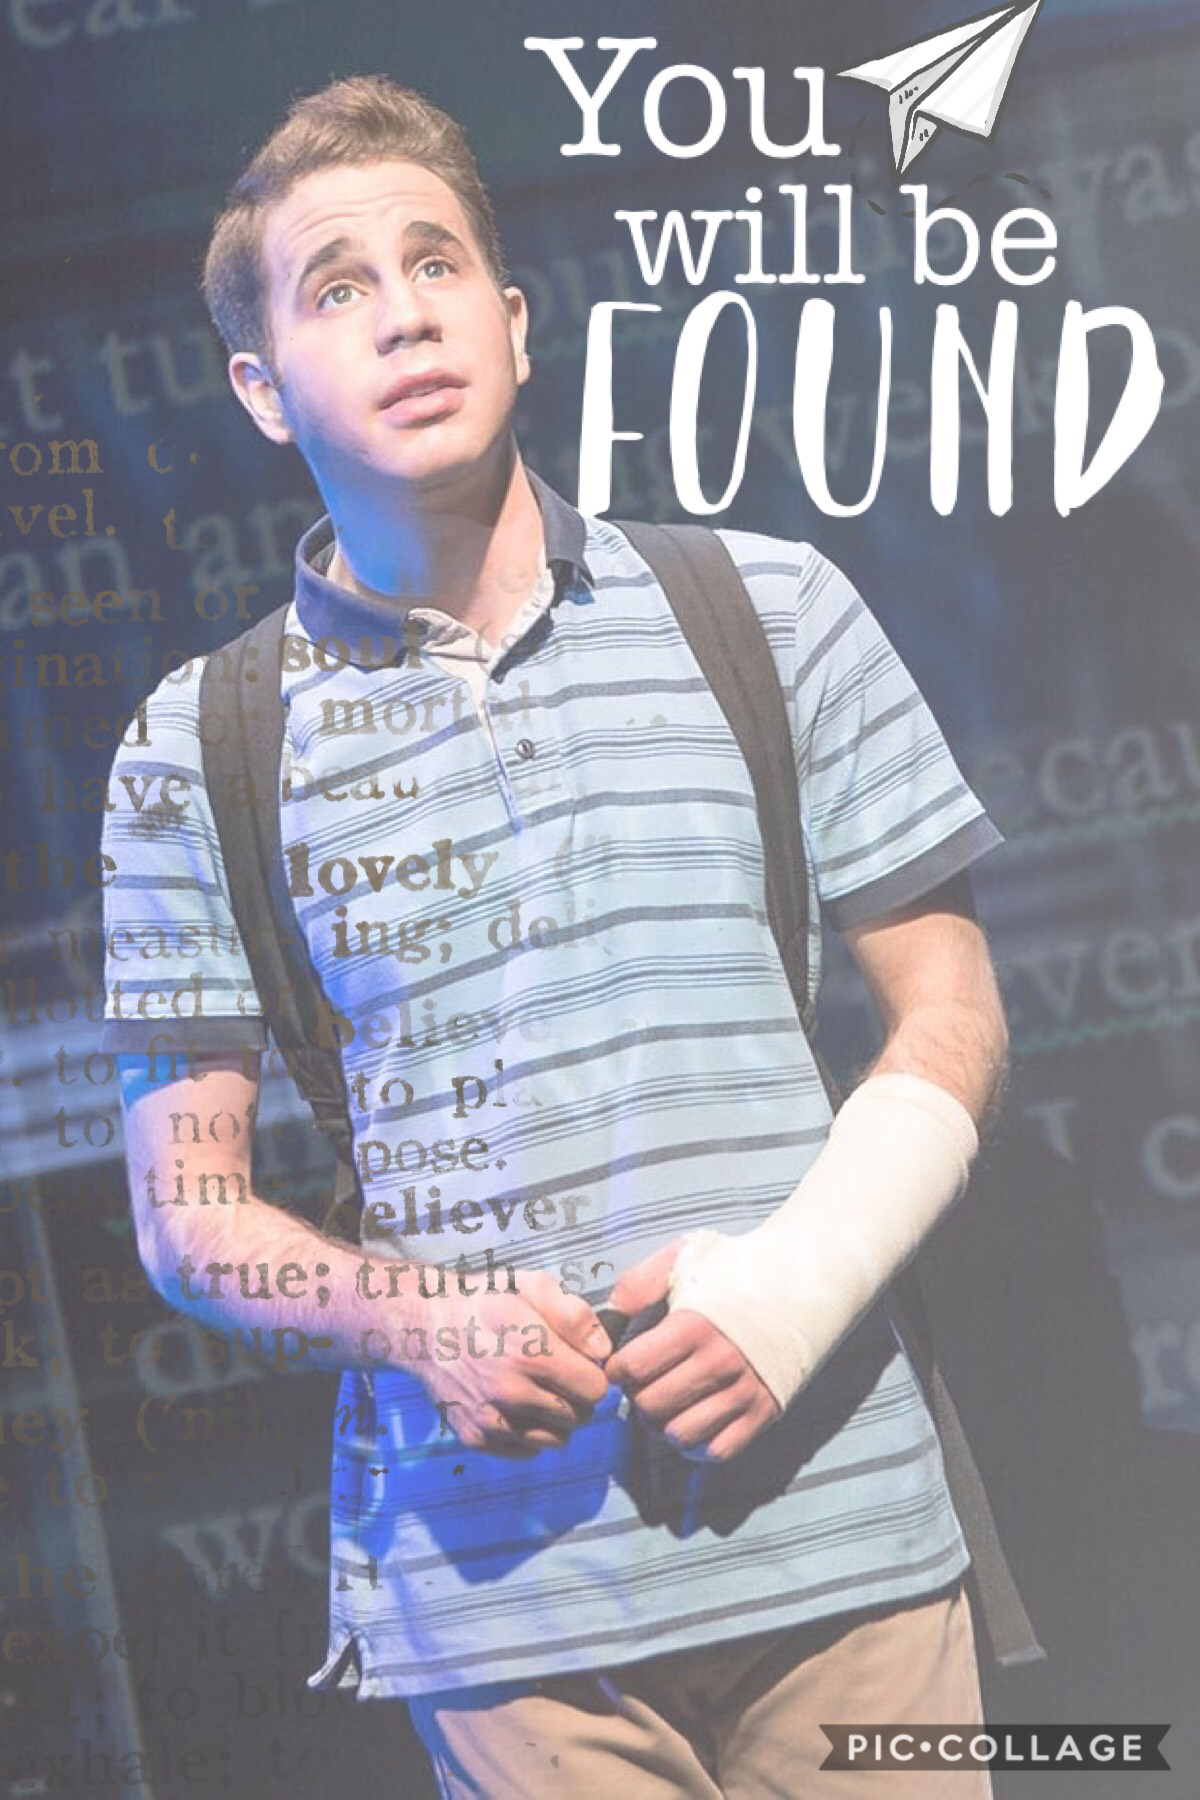 DEH FANS CLICK
I LOVE Dear Evan Hansen sooo much!!! The book, the musical, everything! QOTD- what’s your fav DEH song?
AOTD- Good for you (but I LOVE THEM ALL!!!)